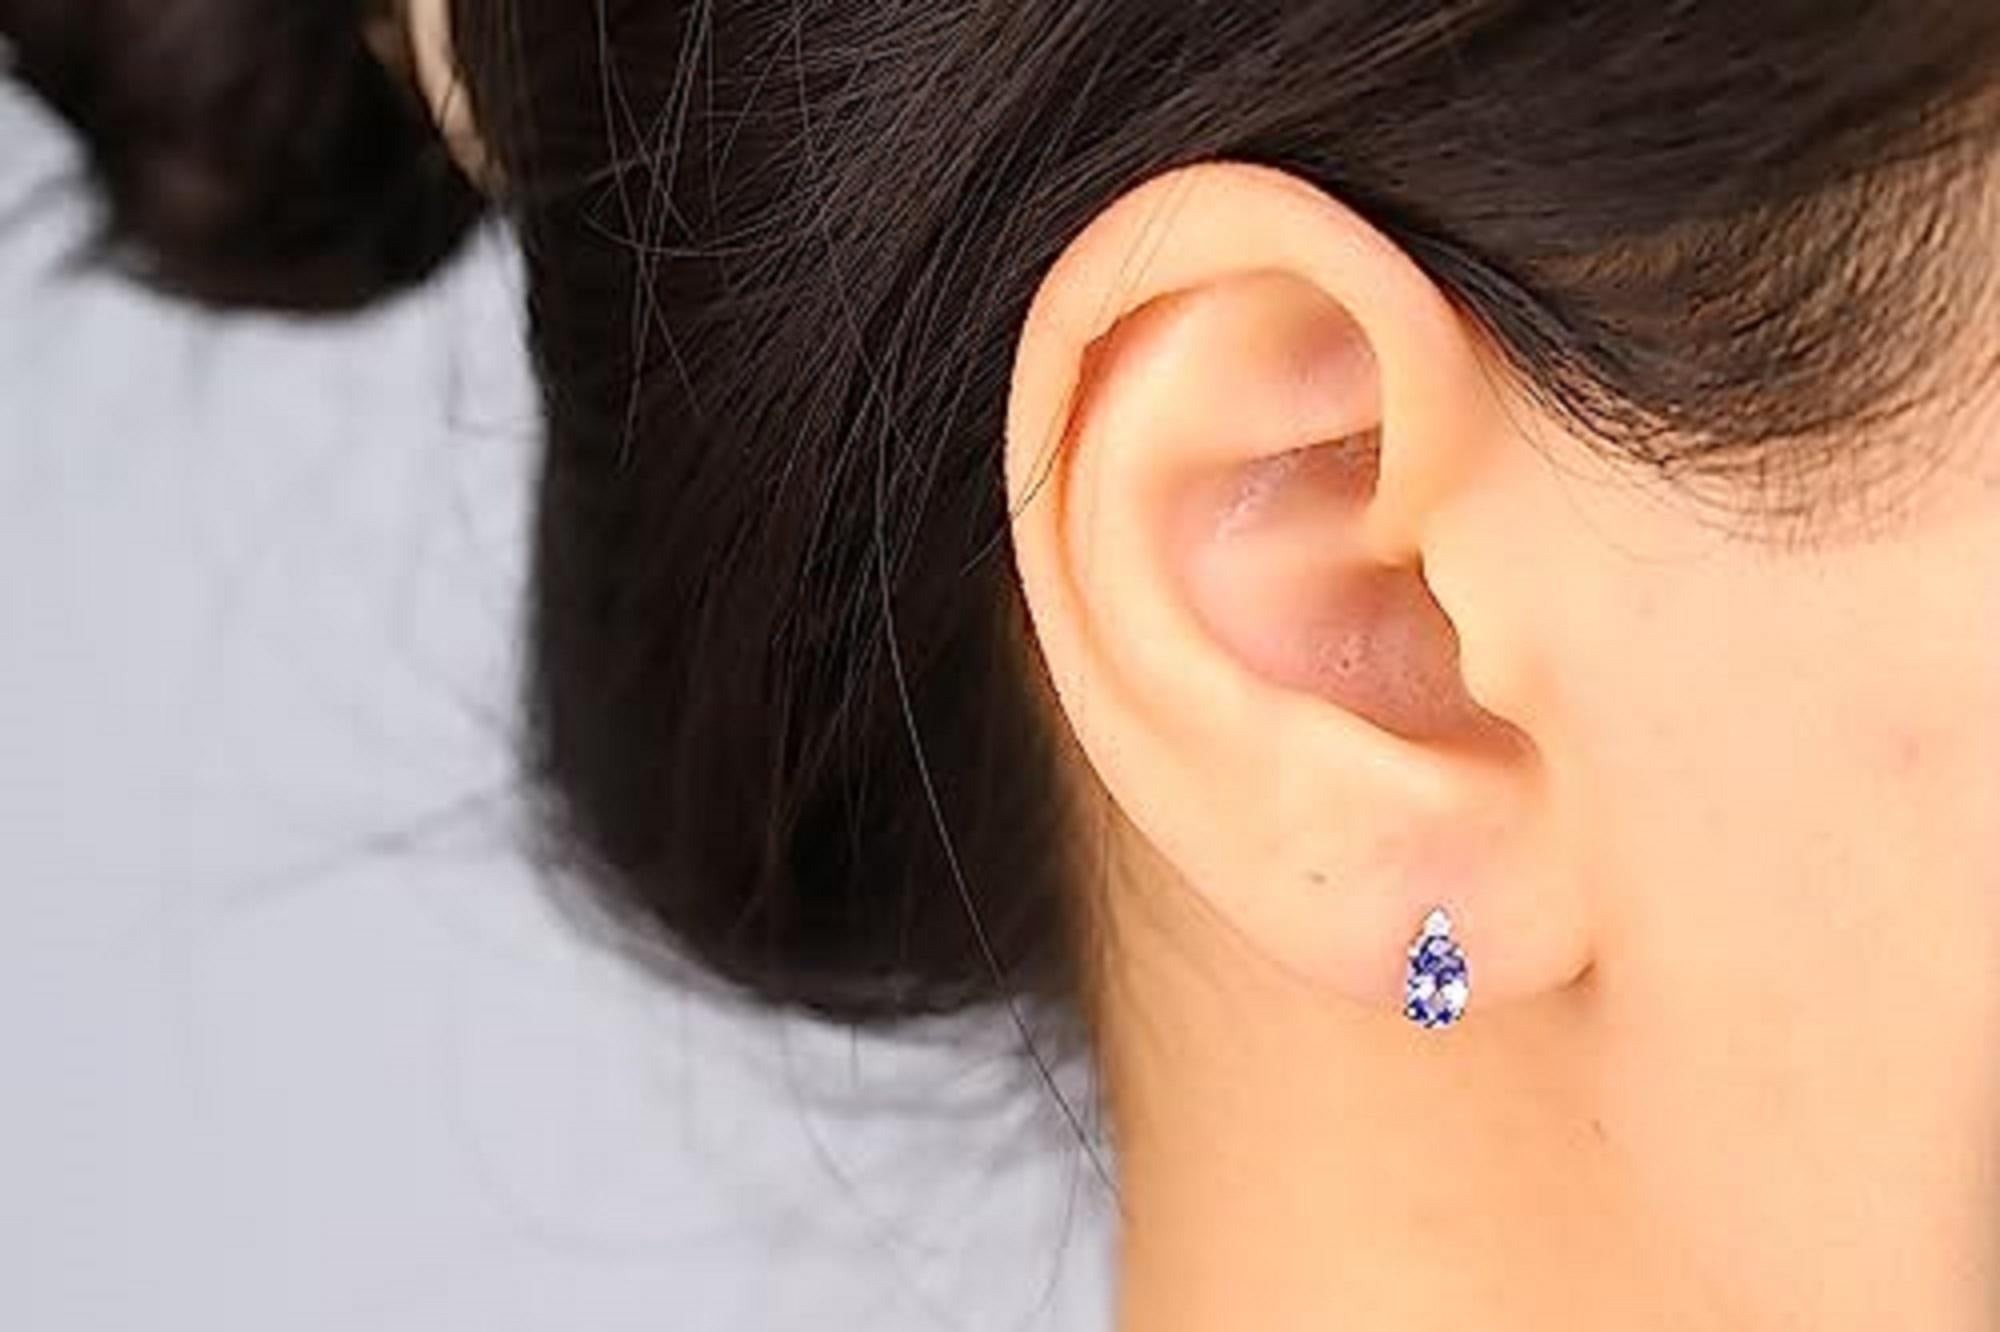 Decorate yourself in elegance with this Earring is crafted from 10-karat White Gold by Gin & Grace Earring. This Earring is made up of 6x4 mm Oval-Cut Tanzanite (2 pcs) 0.92 carat and Round-cut White Diamond (2 Pcs) 0.03 Carat. This Earring is